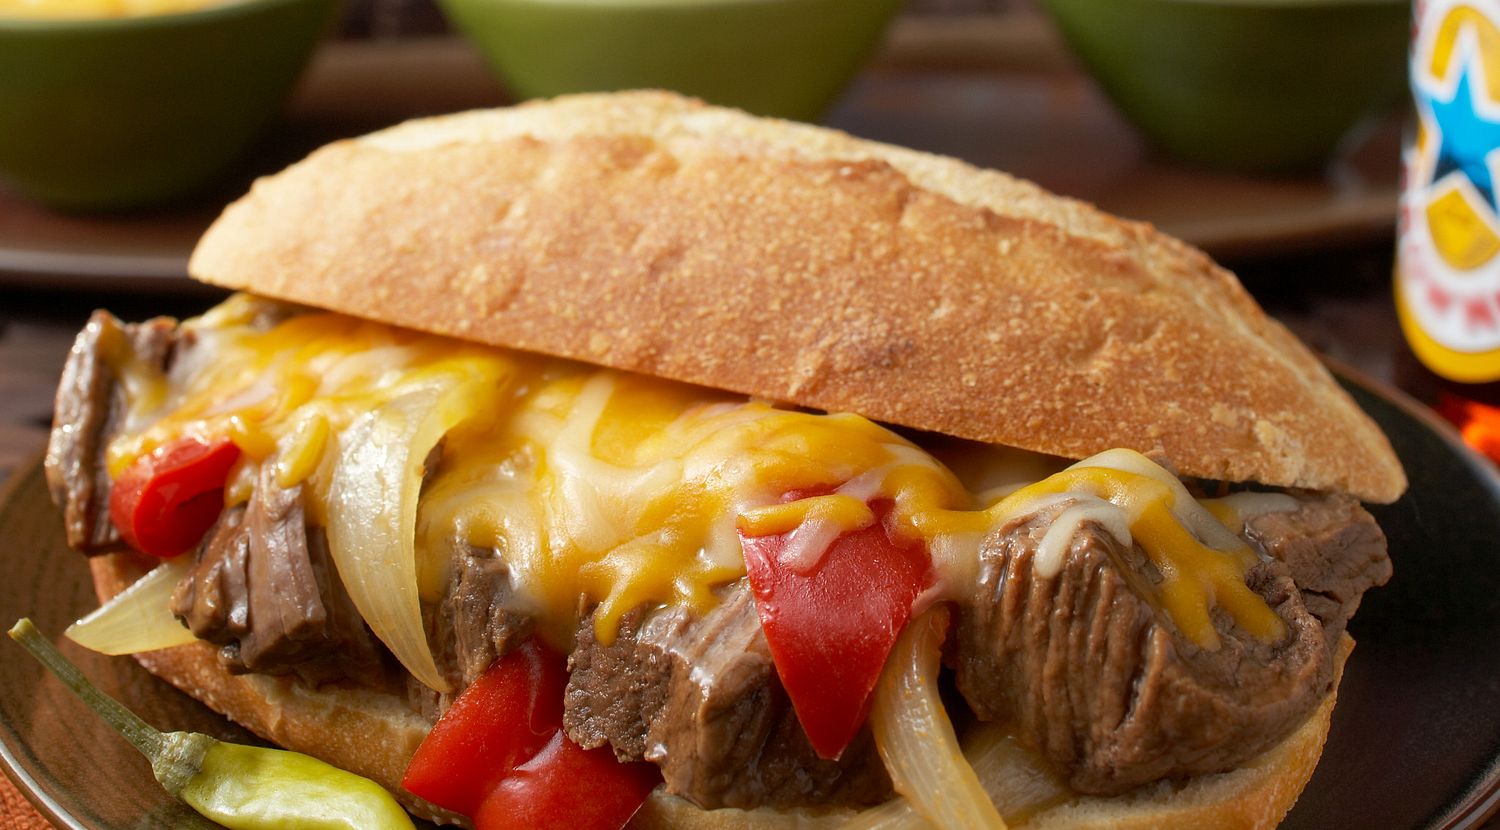 Sweet Onion & Pepper Beef Sandwiches with Au Jus